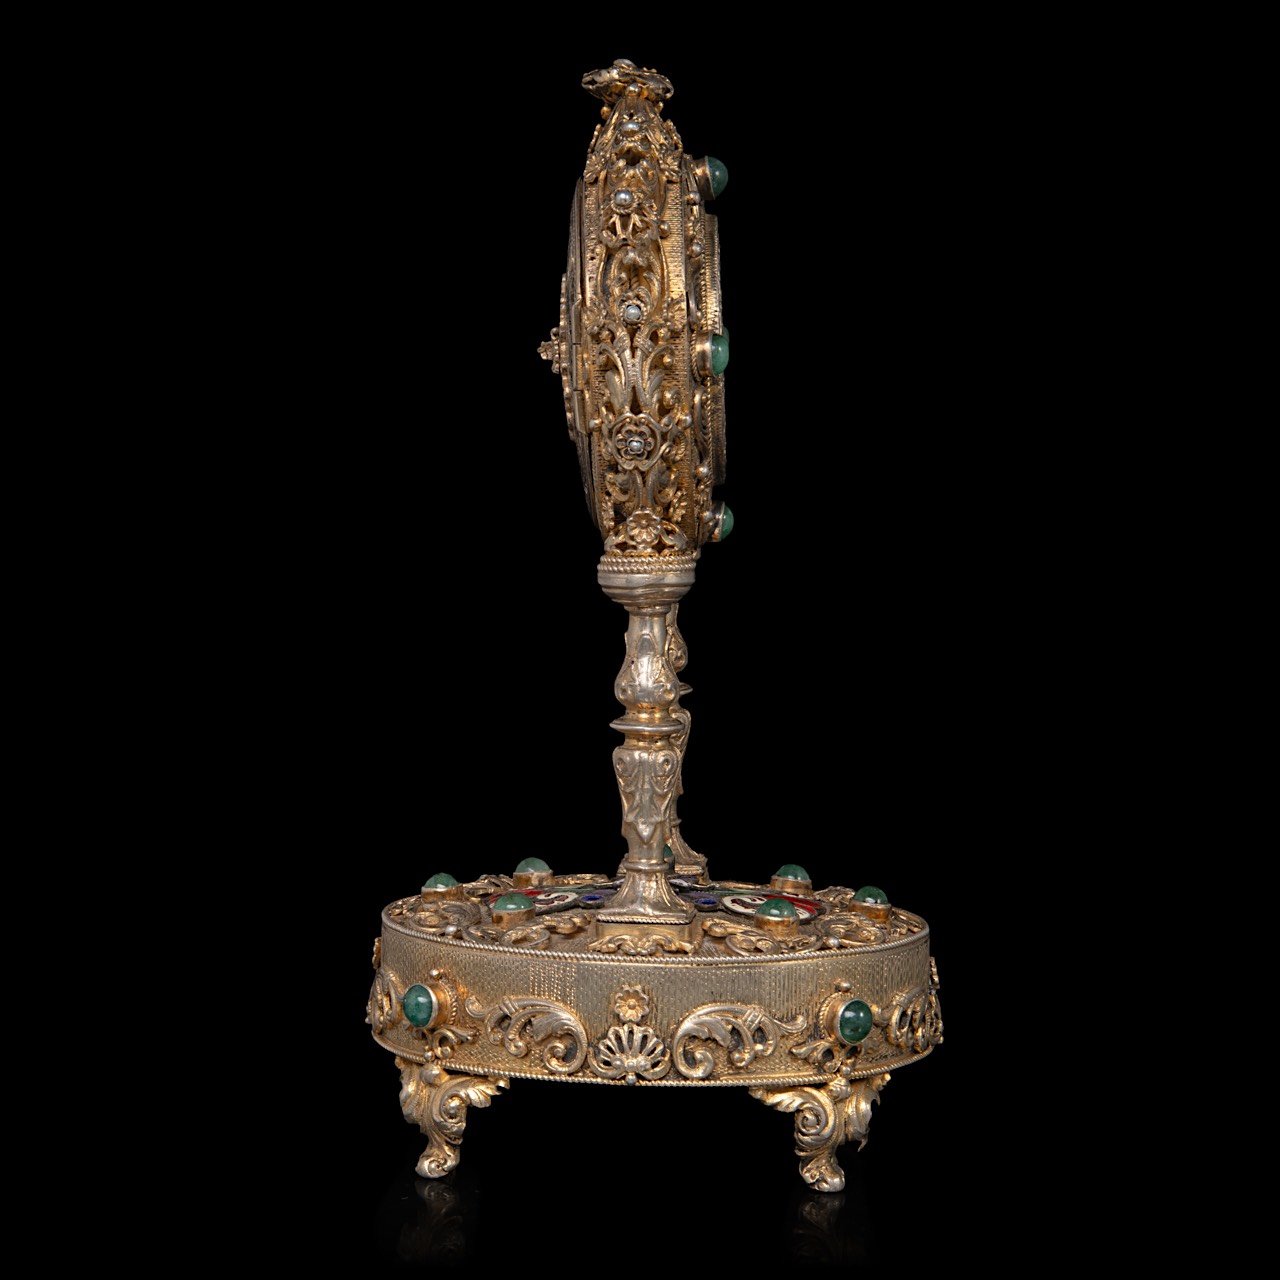 An Austrian gilt-silver and enamel clock with music box, decorated with semi-precious stones and mot - Image 5 of 7